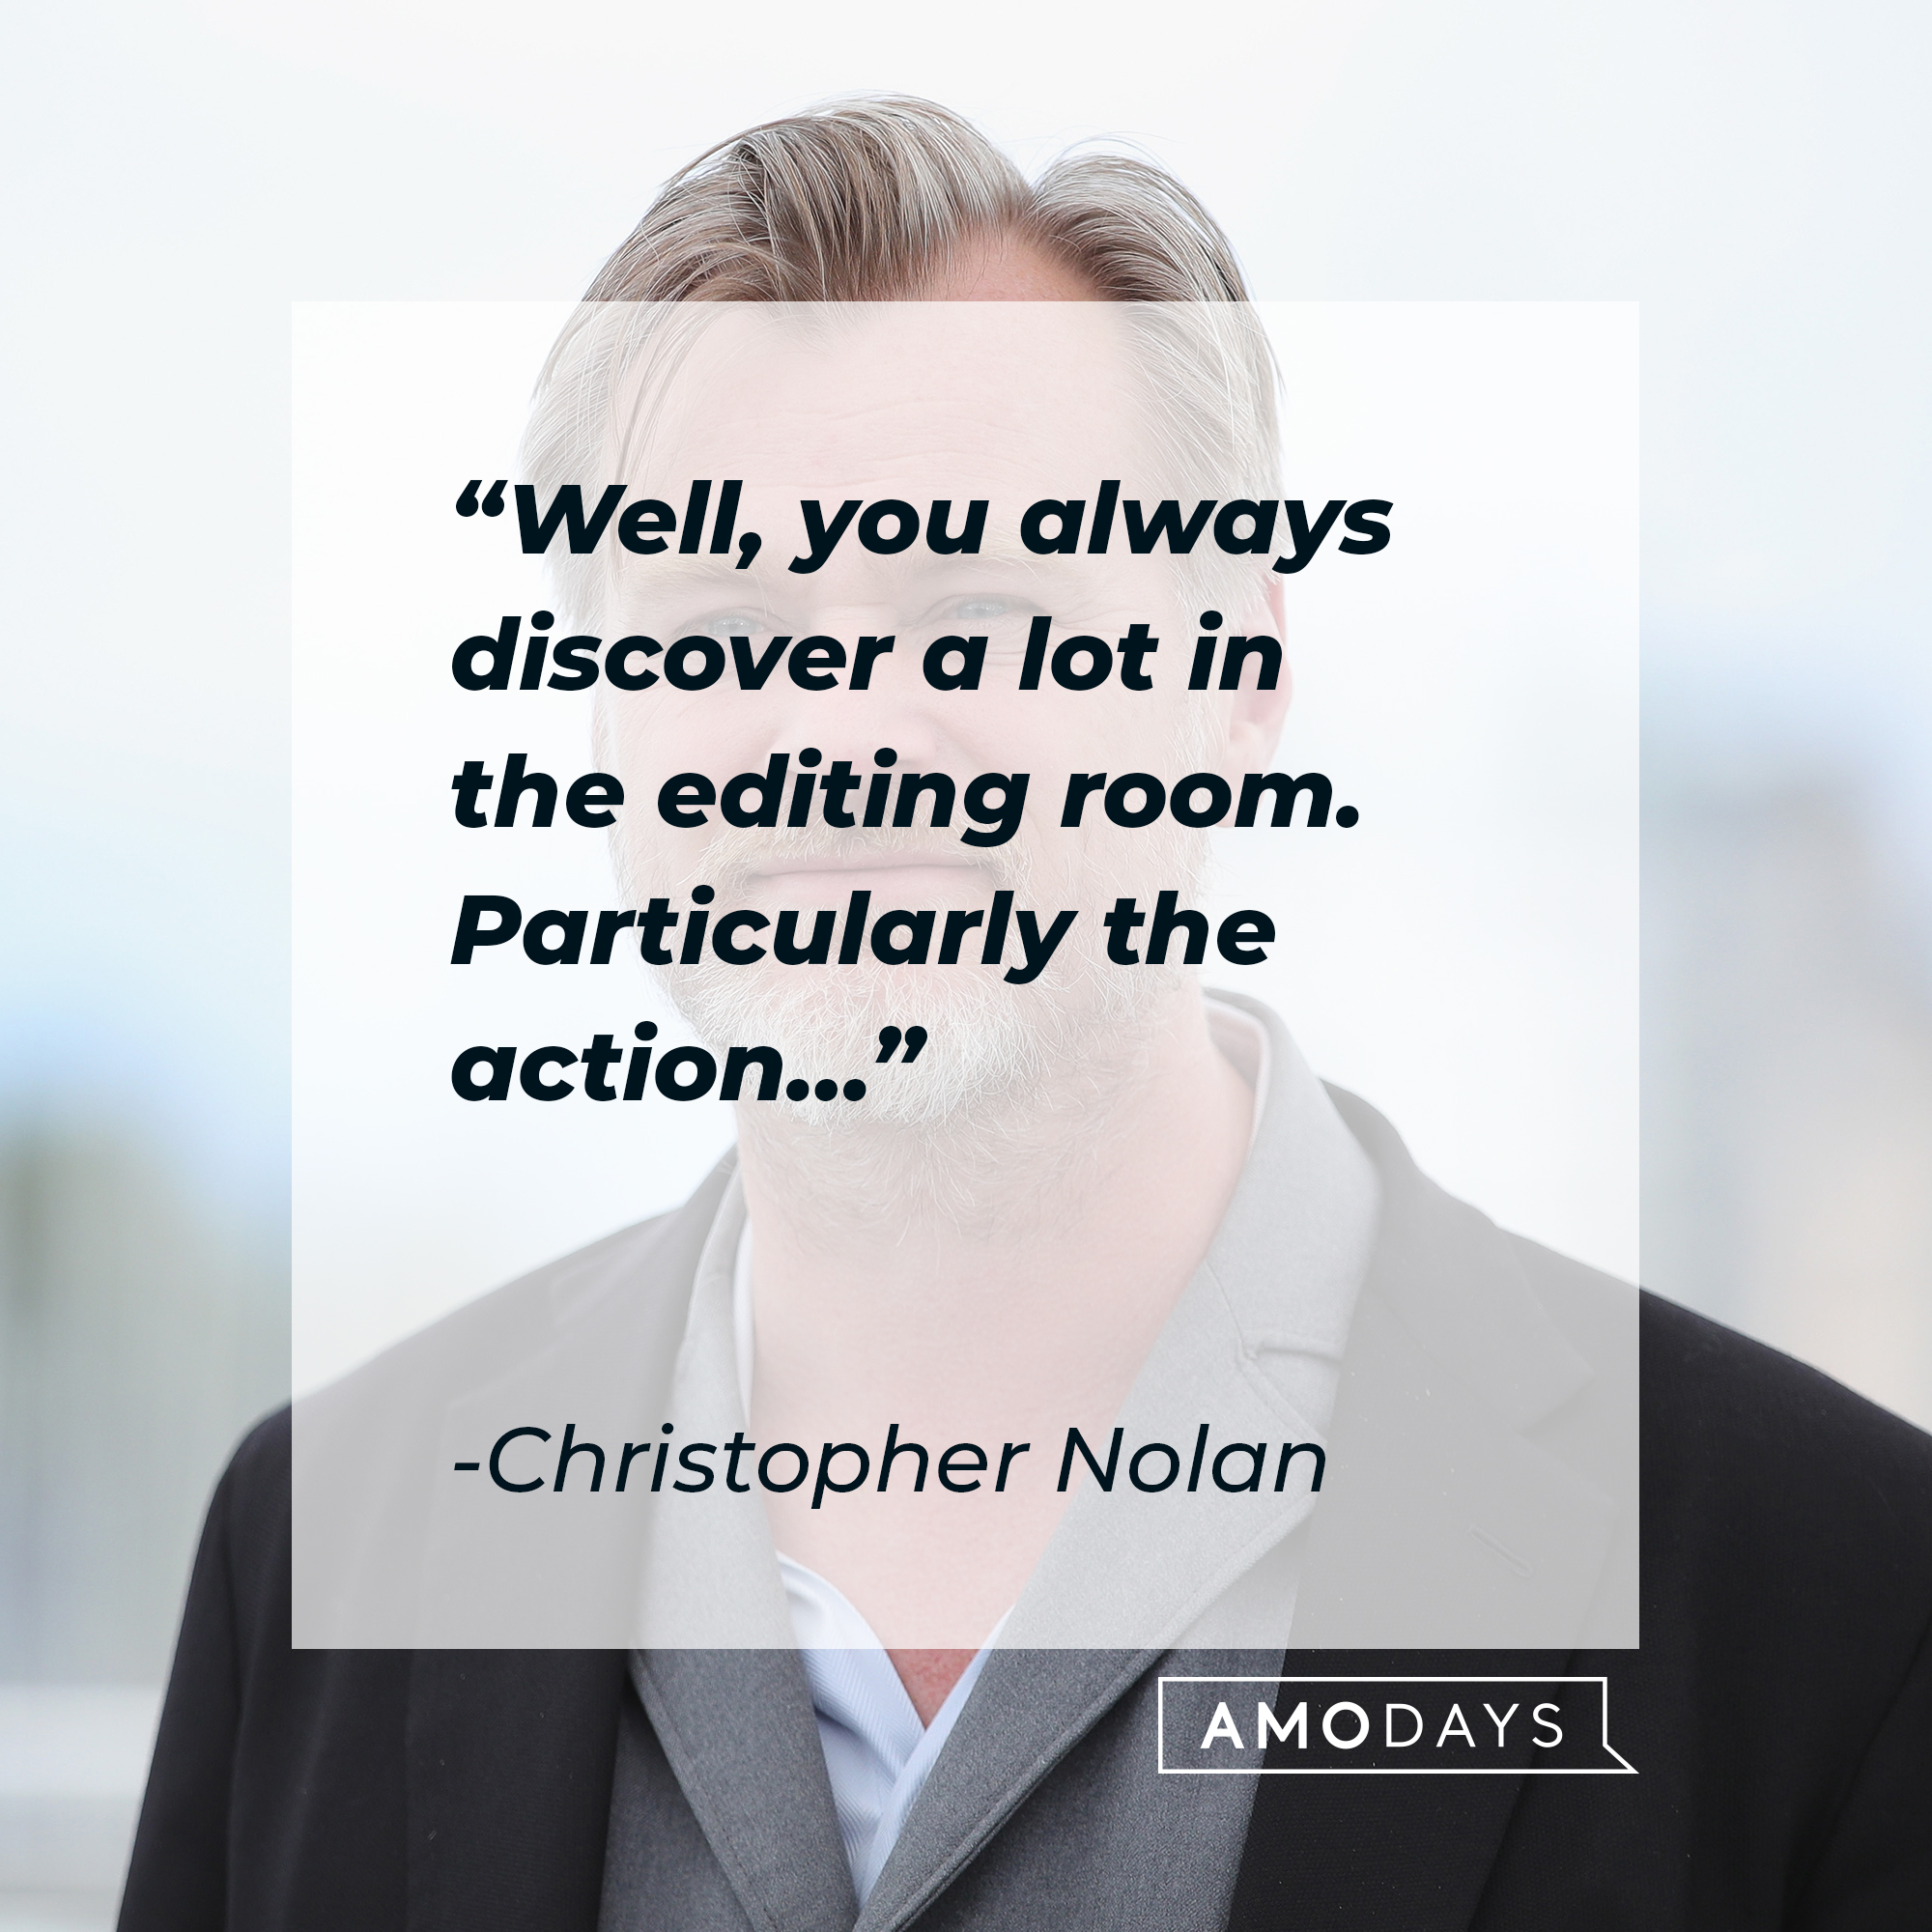 Christopher Nolan, with his quote: “Well, you always discover a lot in the editing room. Particularly the action…” | Source: Getty Images